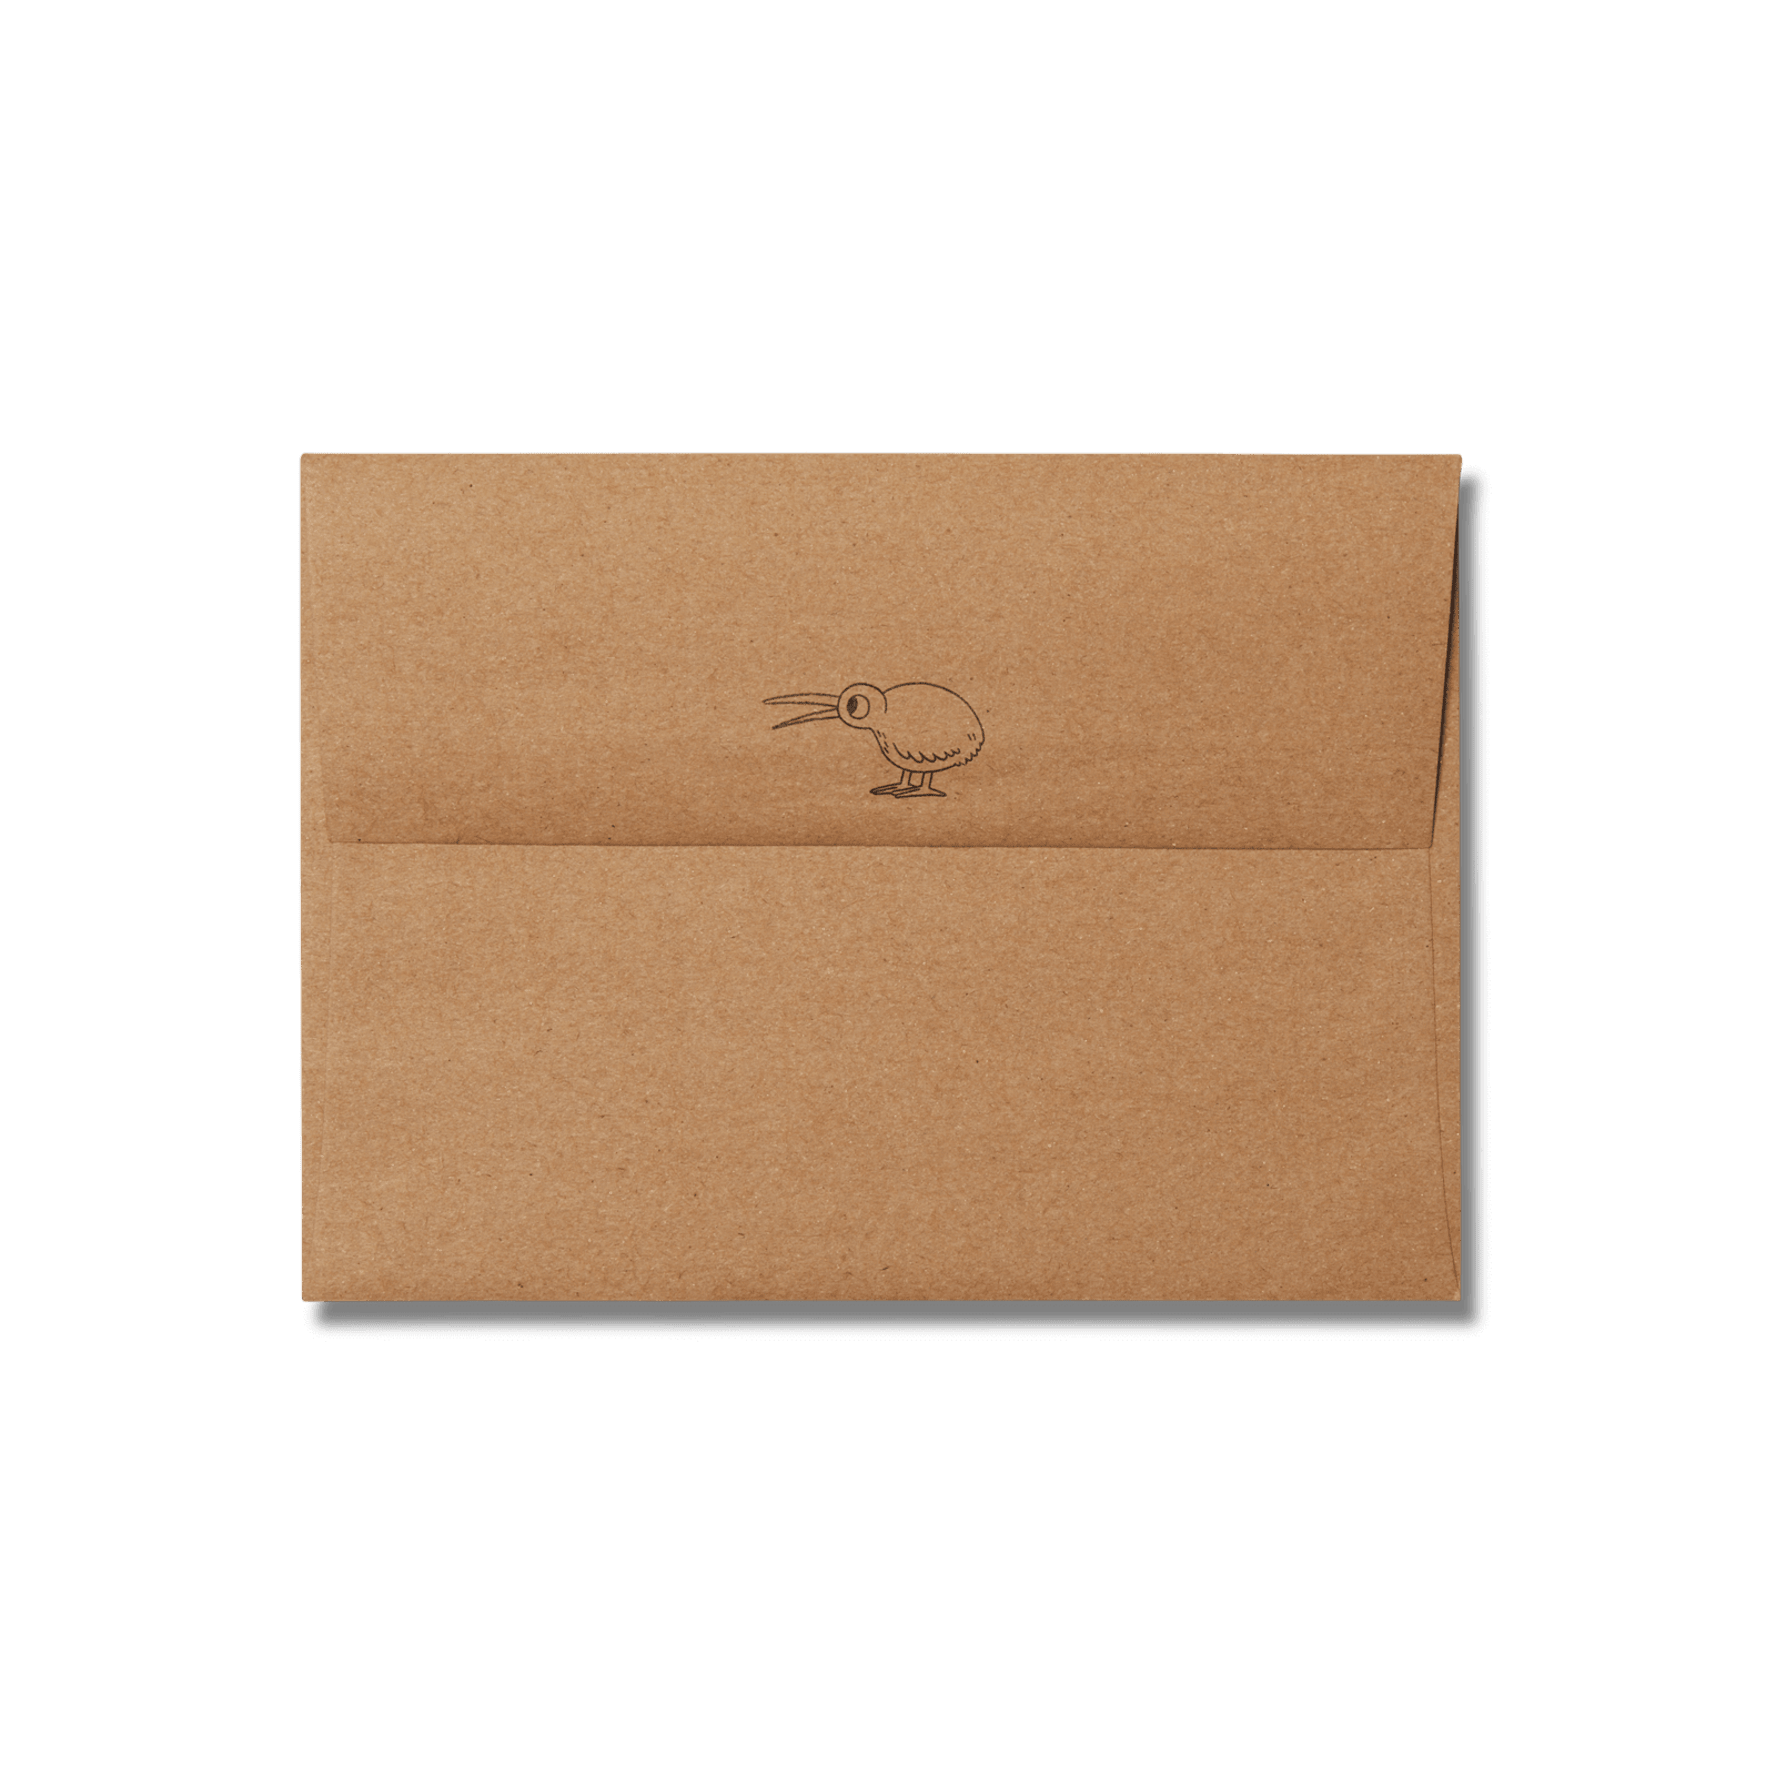 FLYING OUT - Physical Gift Card/Voucher – Flying Out